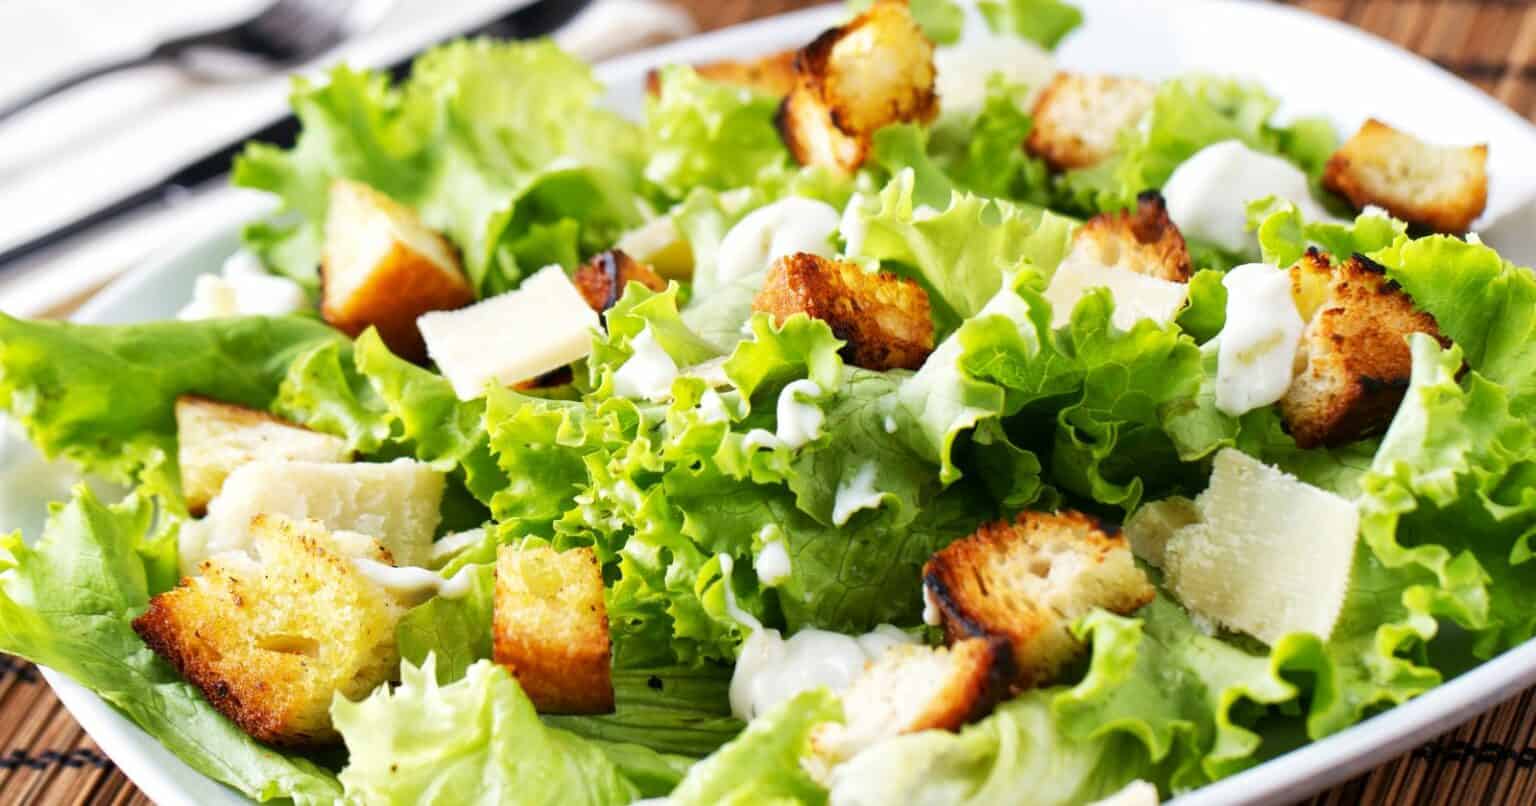 Is Caesar Salad Supposed to Be Spicy? Separating Myth From Tradition